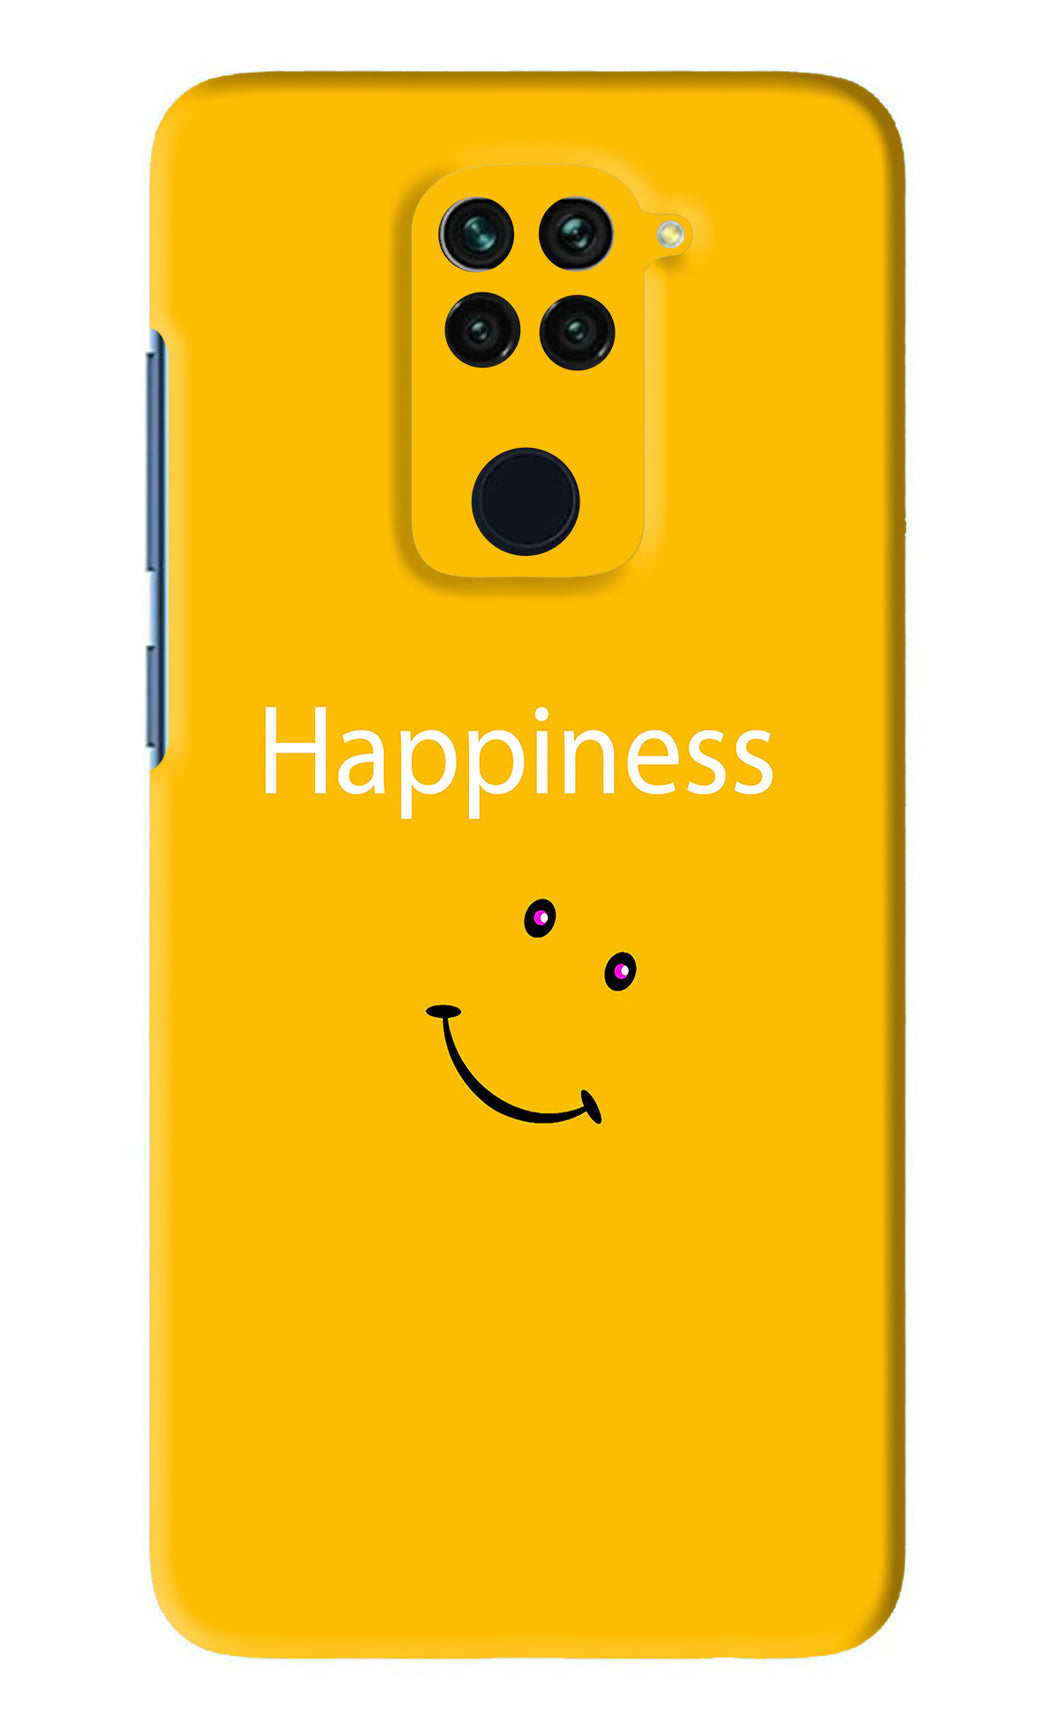 Happiness With Smiley Xiaomi Redmi Note 9 Back Skin Wrap